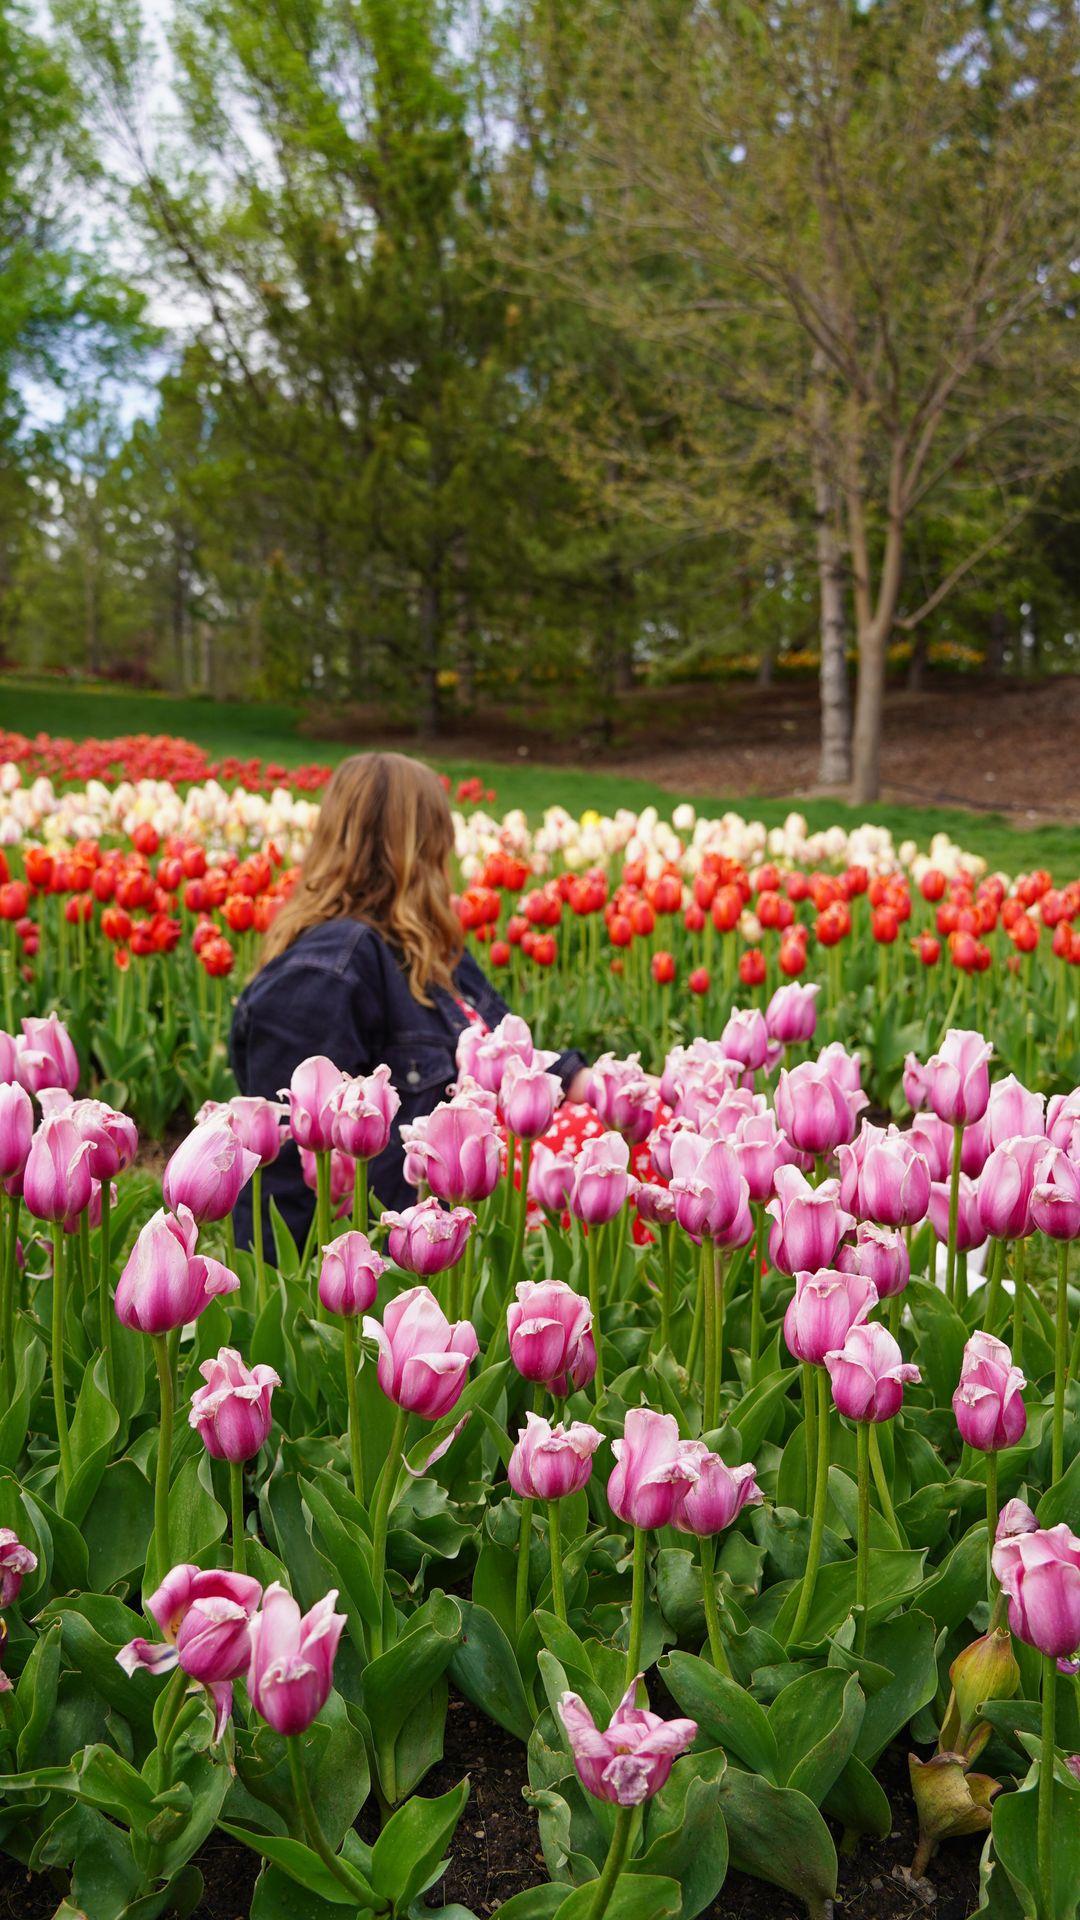 How many different colors of flowers did you see in this video?! 🌷